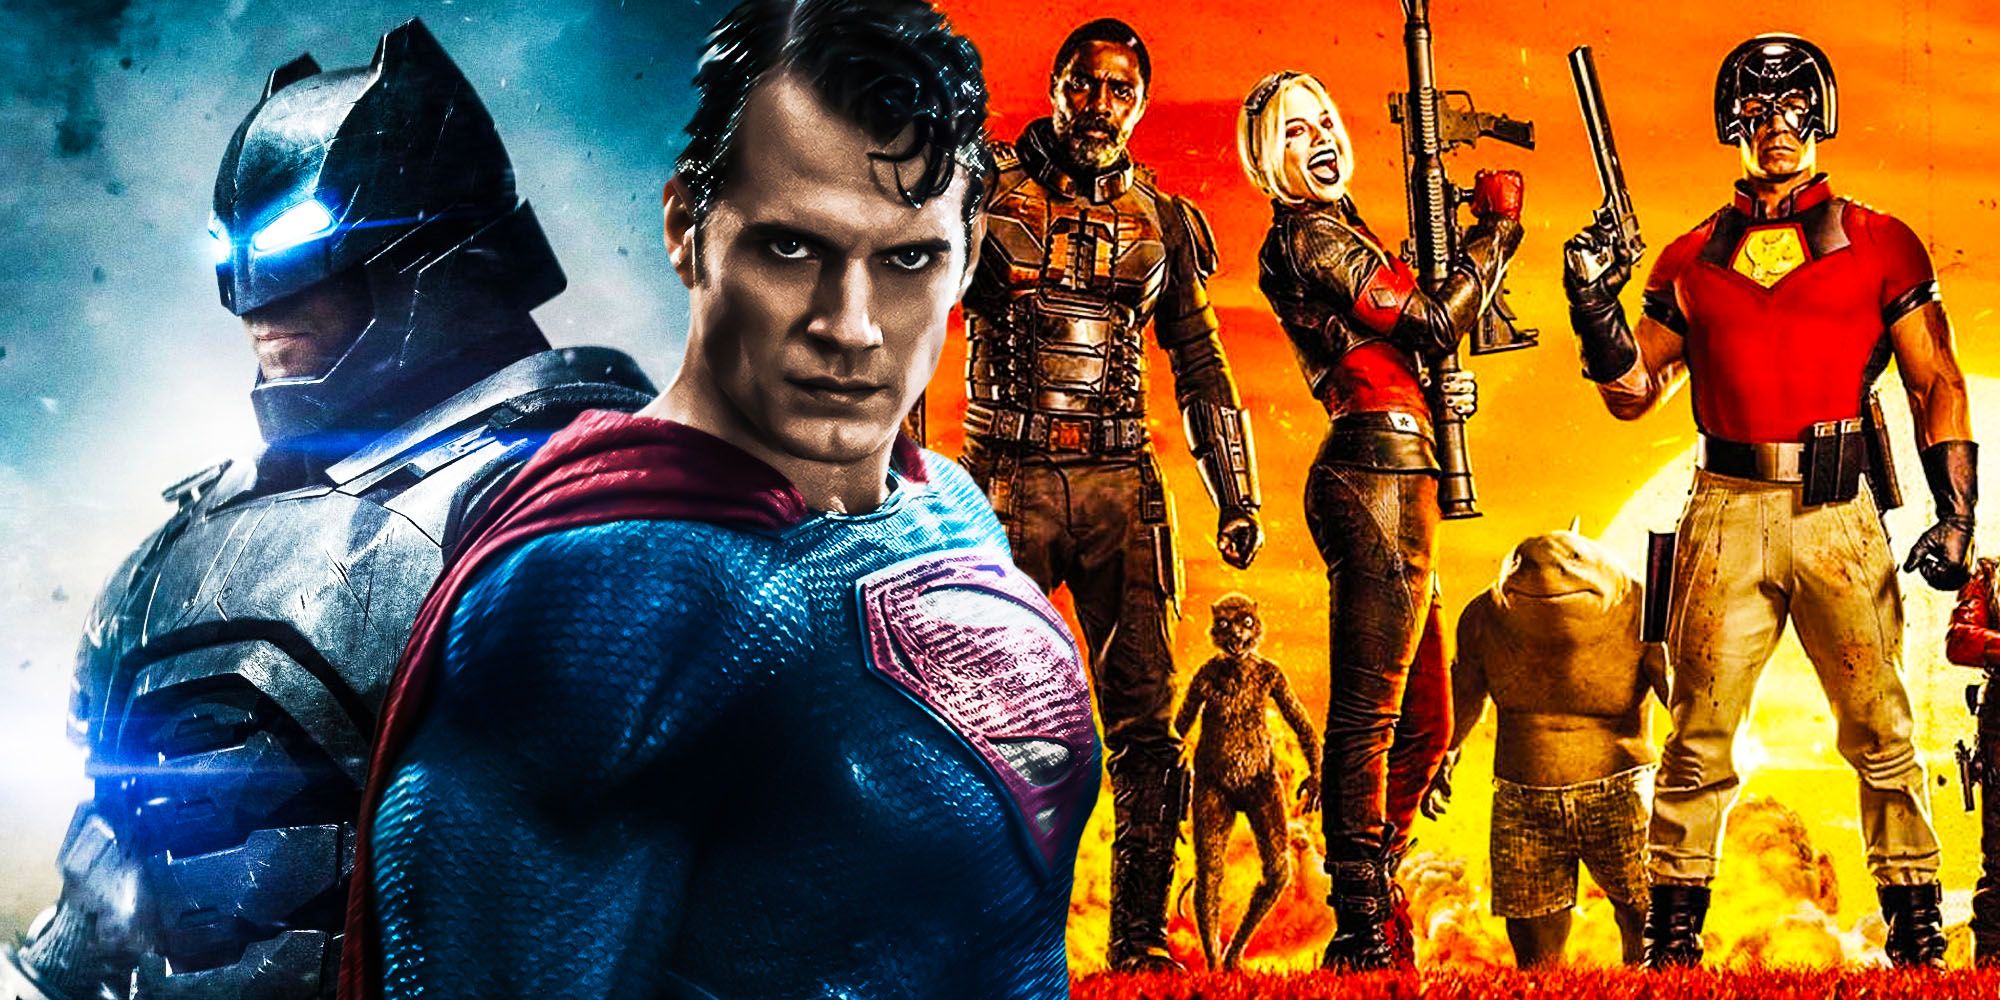 The Suicide Squad Proves WB Learned the Wrong Lessons From BvS